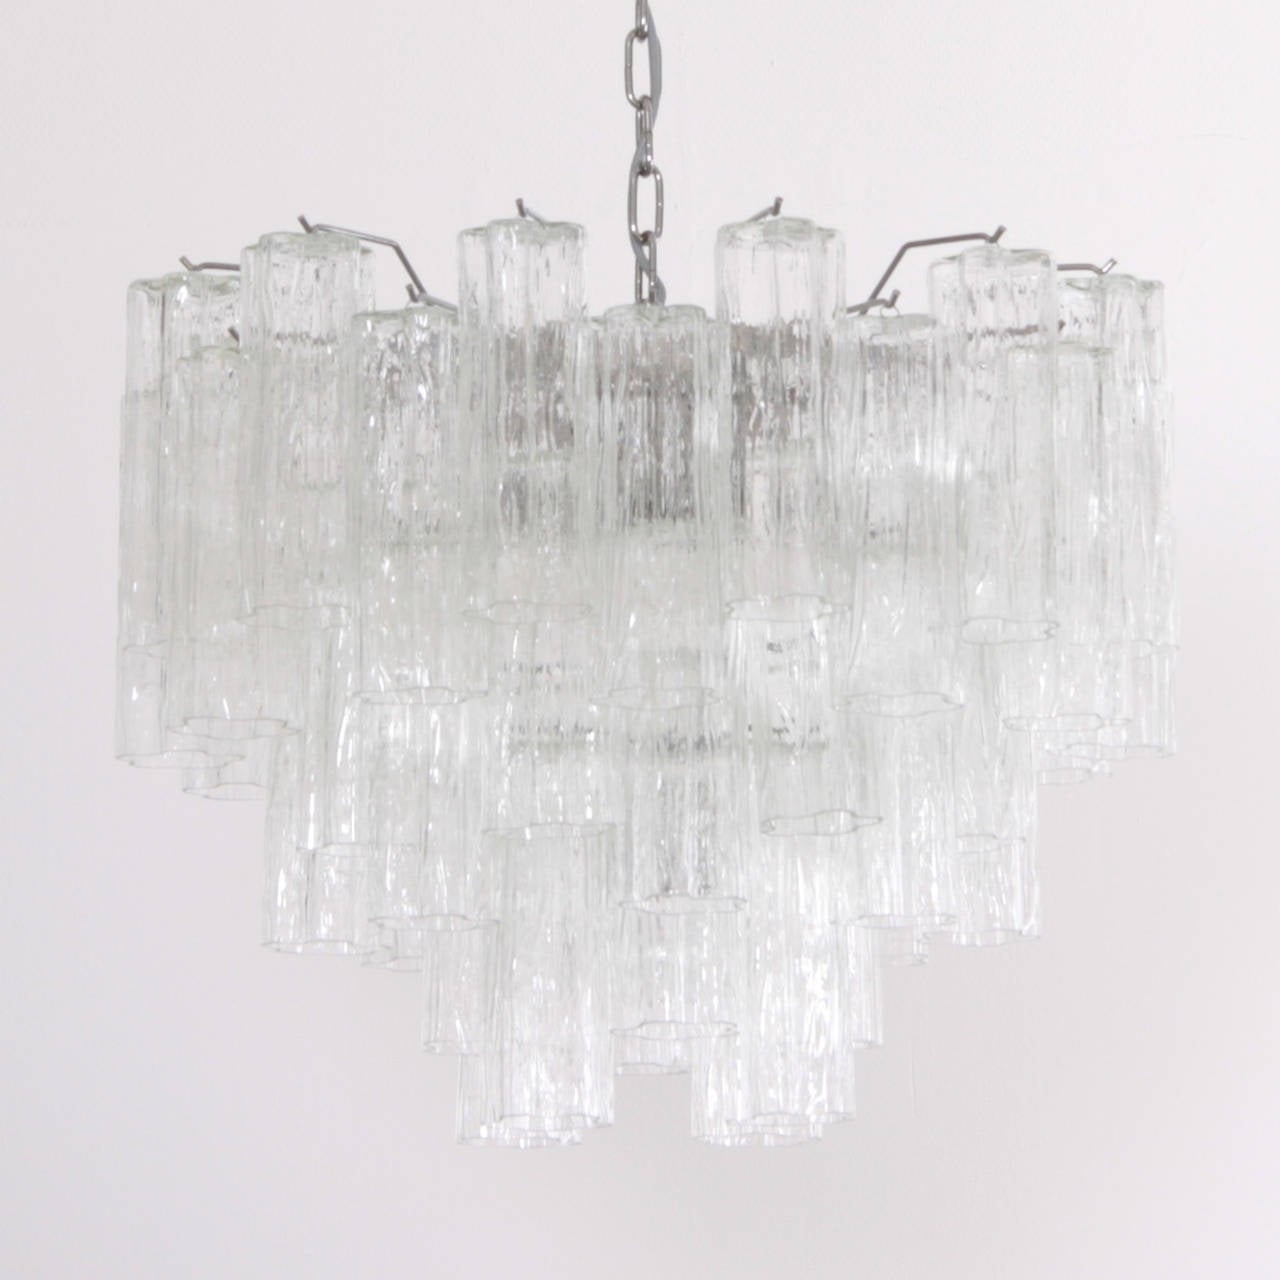 Huge high quality Murano glass chandelier, which brings wonderful lighting atmosphere in every room. The chandelier has multiple tiers of handmade Tronchi glasses fixed on a chrome armature. The chandelier is in excellent condition. A smaller